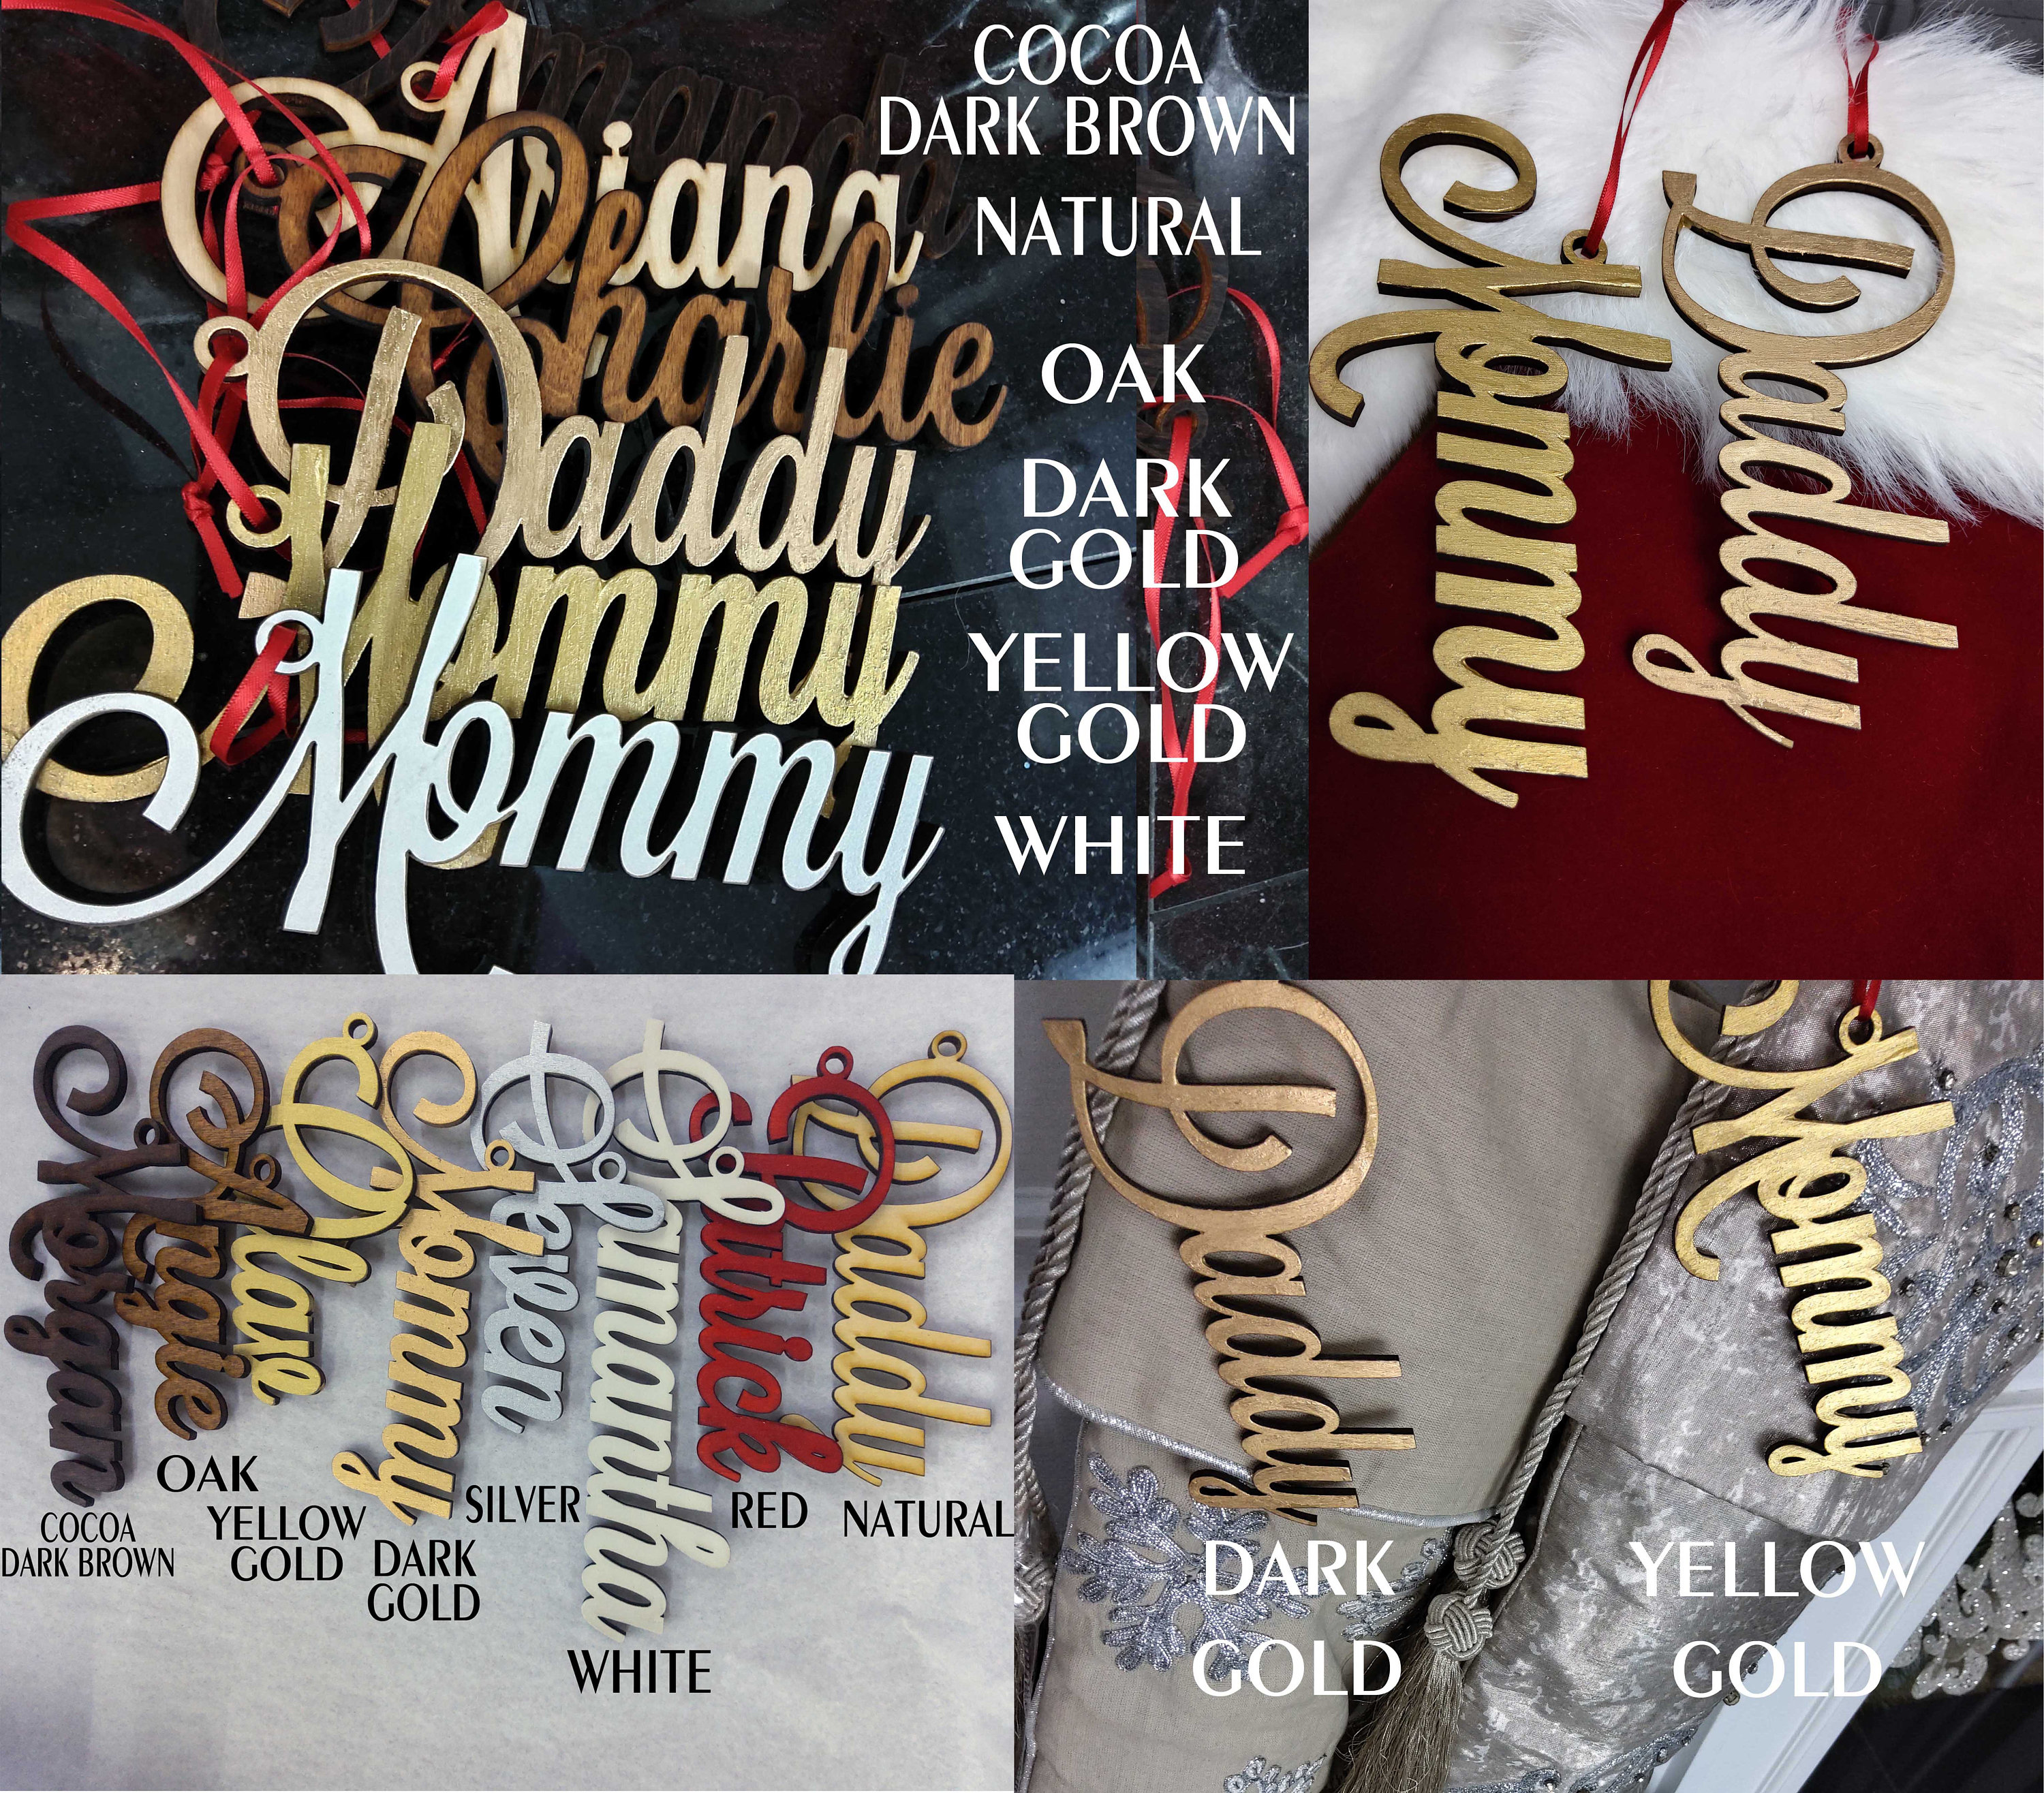 Gold Christmas Stockings Name Tags Acrylic Names for Stocking Family  Personalized Tag Decor for Holidays, Modern Decor item SAL260 